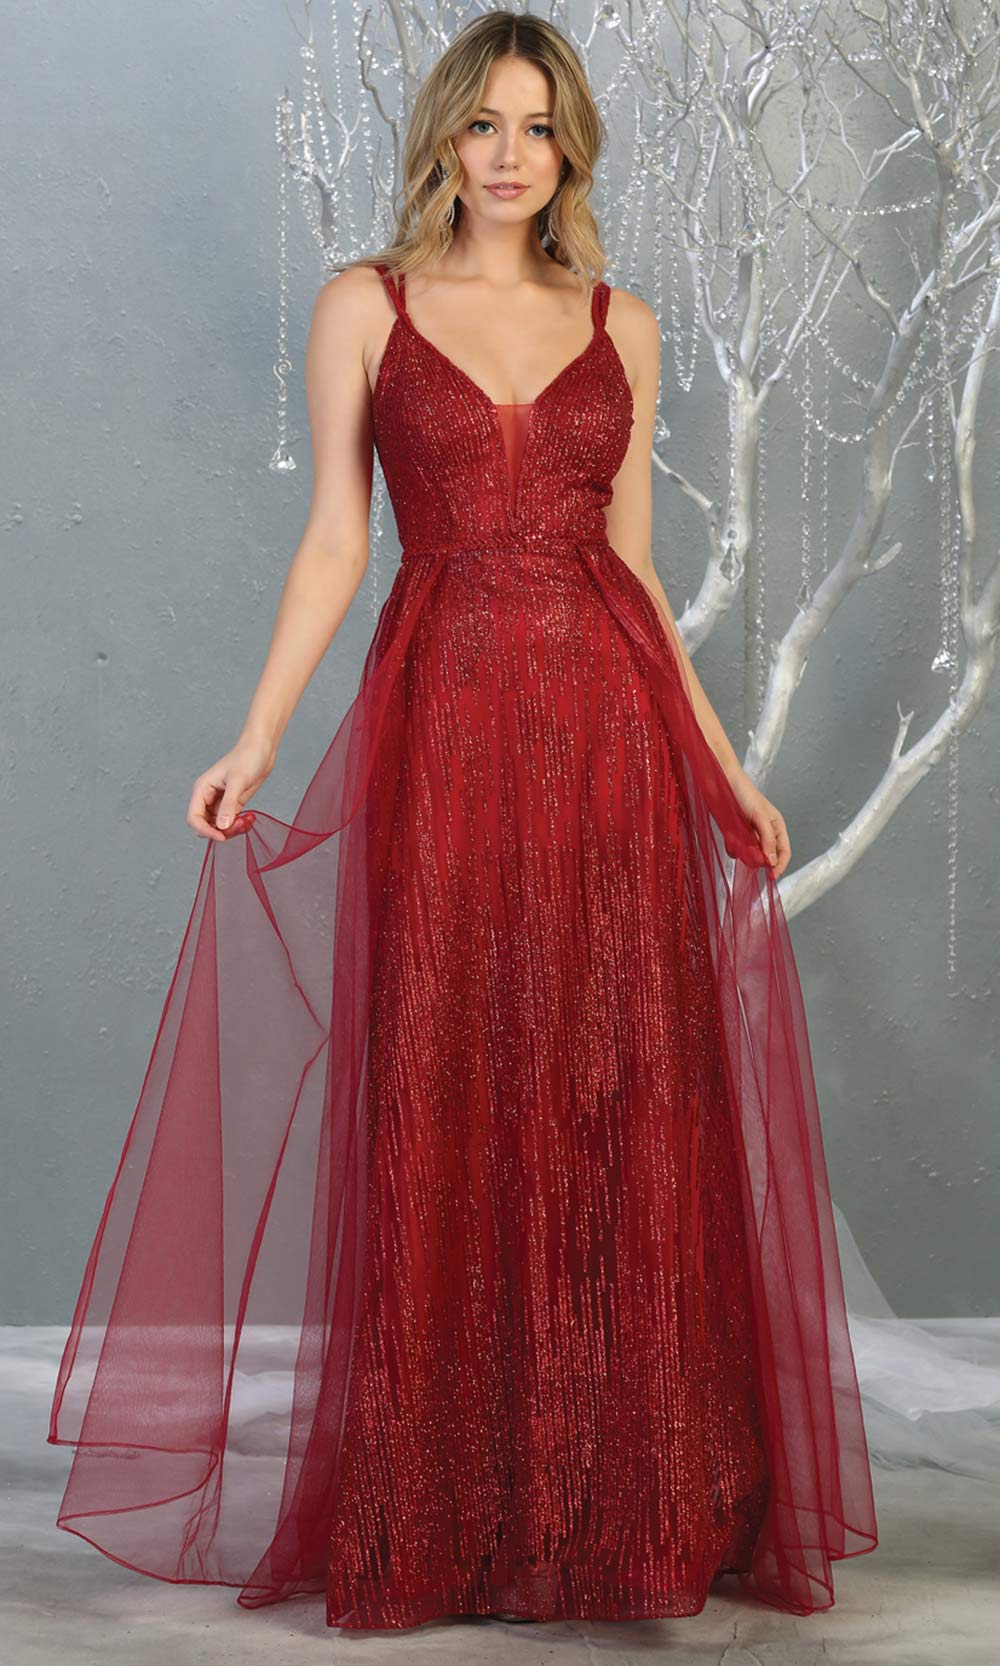 Mayqueen MQ1735 long sequin beaded  burgundy red evening dress with straps & skirt overlay. This full length dark red gown is perfect for enagagement/e-shoot dress, wedding reception dress, indowestern gown, formal evening party dress.Plus sizes avail.jpg